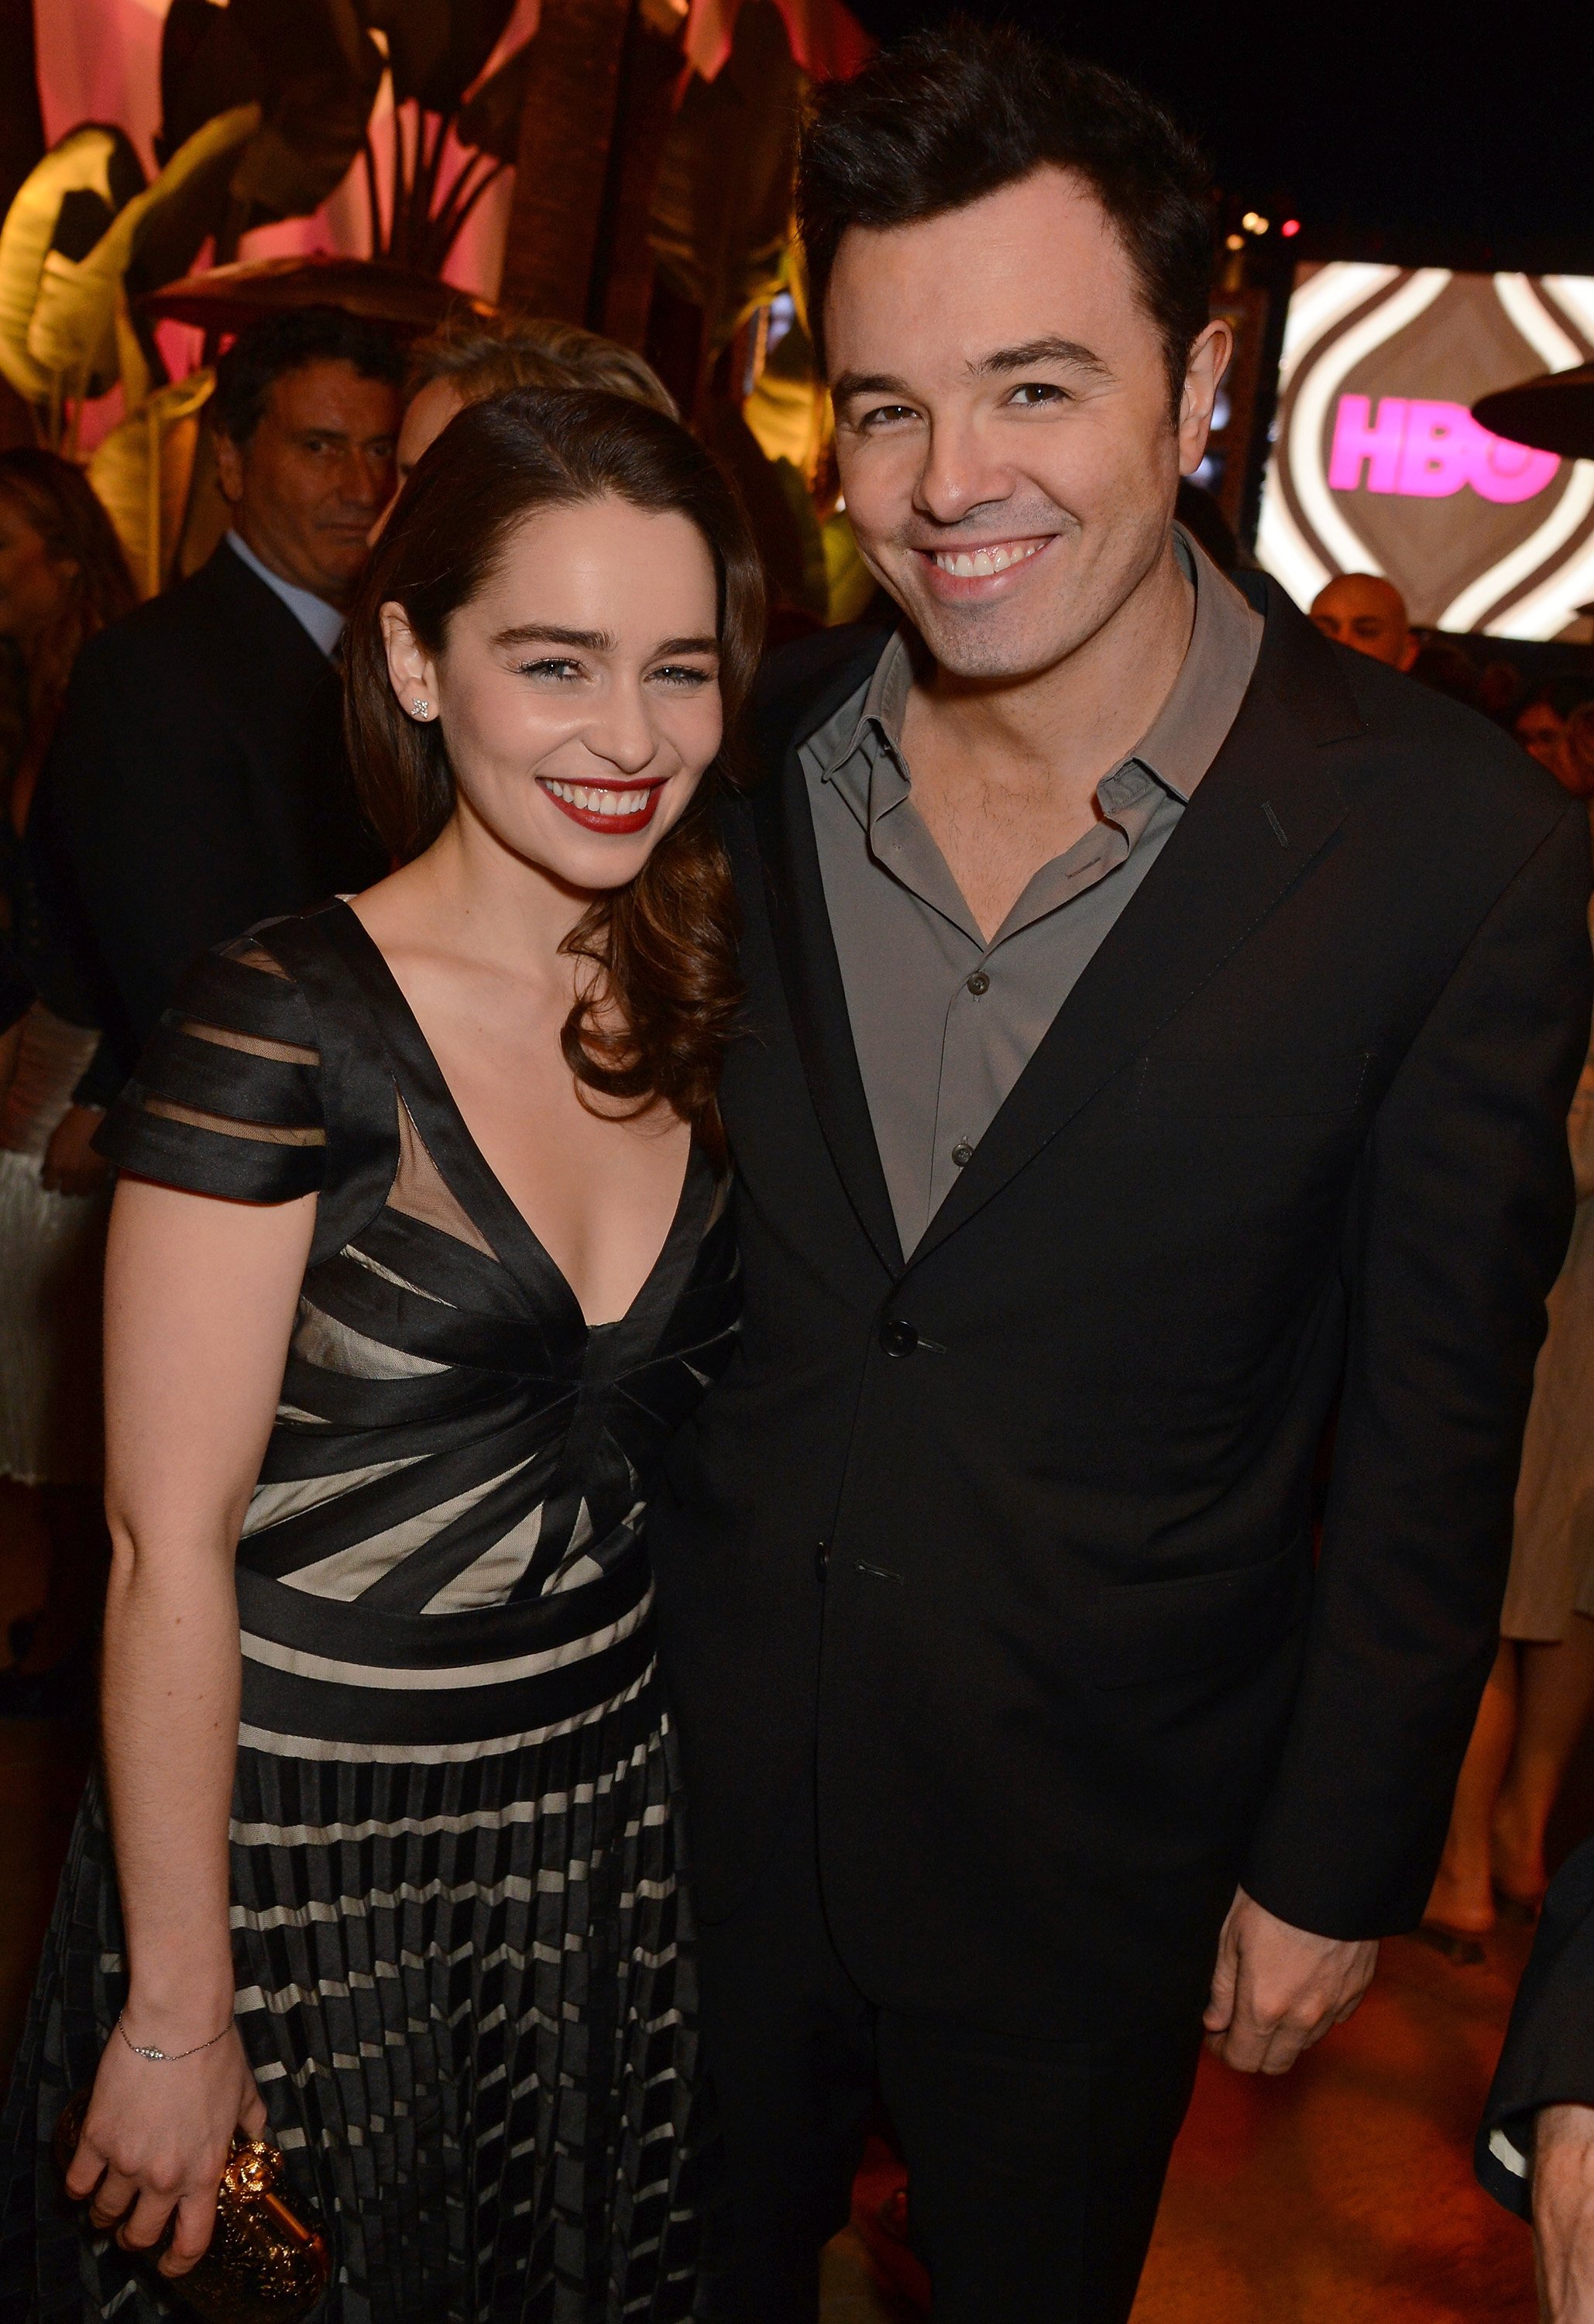 Emilia Clarke and Seth McFarlane attend HBO's Official Golden Globe Awards After Party held at Circa 55 Restaurant at The Beverly Hilton Hotel on January 13, 2013, in Beverly Hills, California. | Source: Getty Images